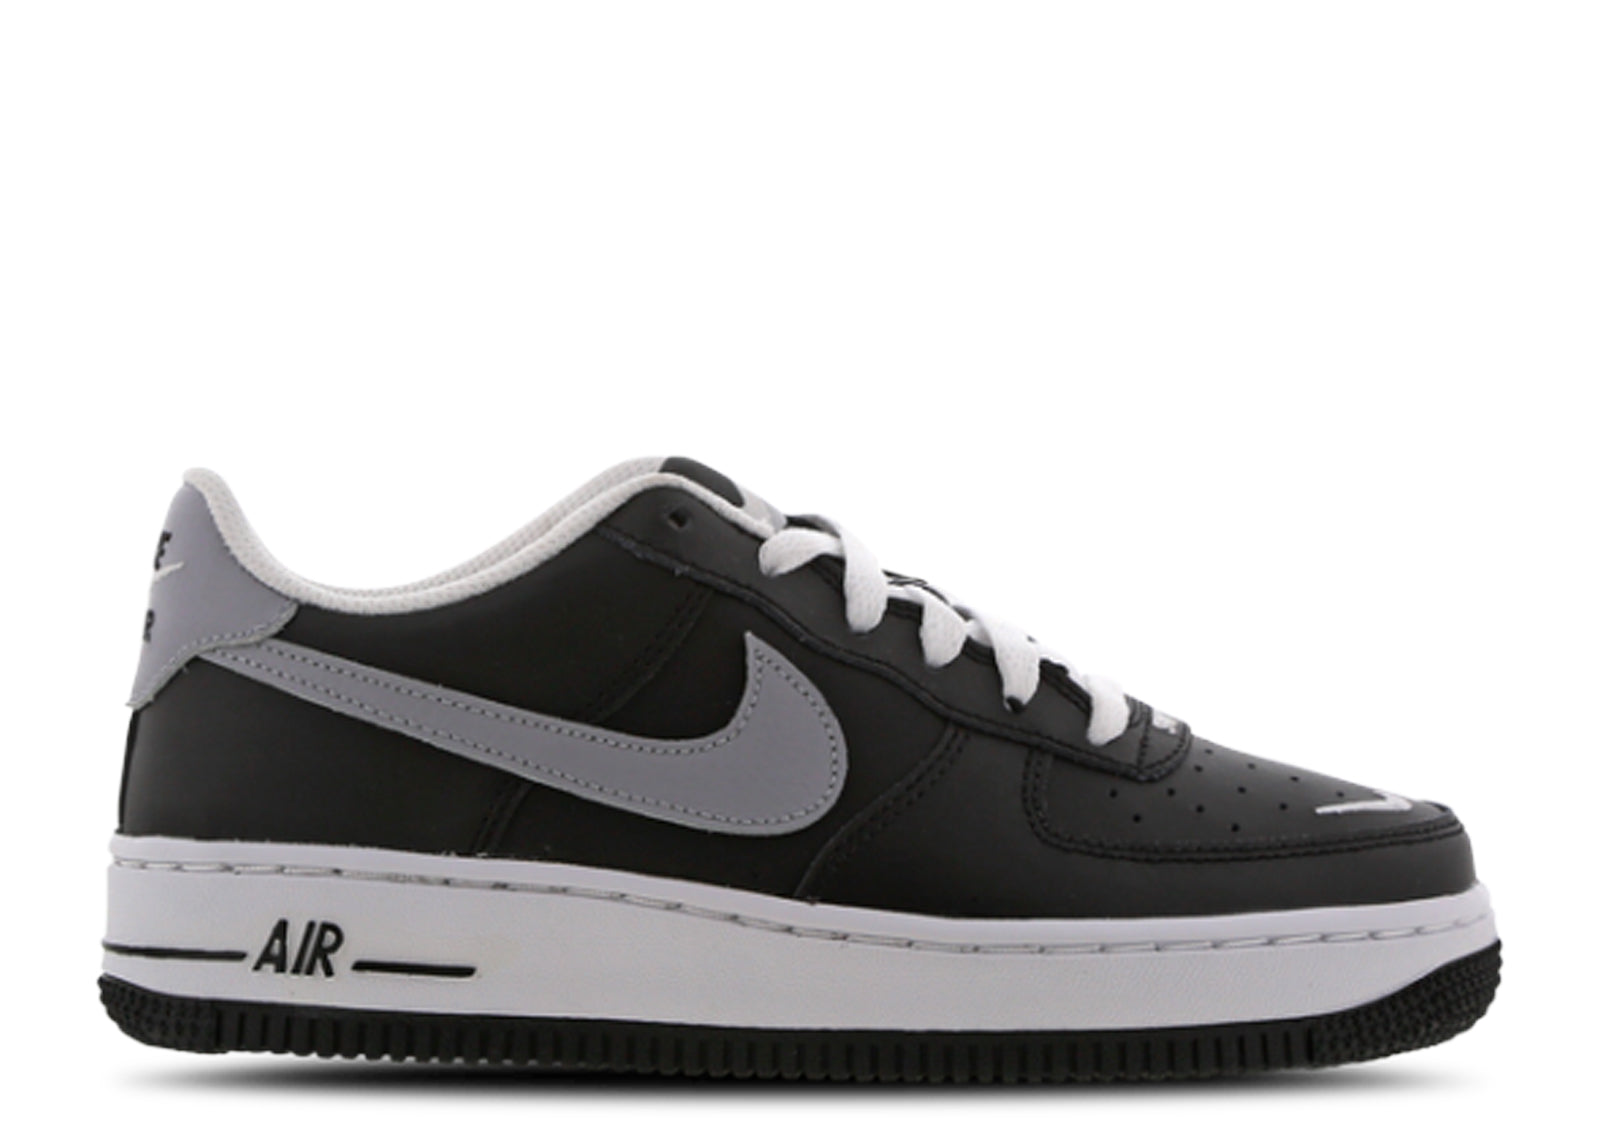 Second Chance - Nike Air Force 1 Black Sport GS - 37,5 | NEW